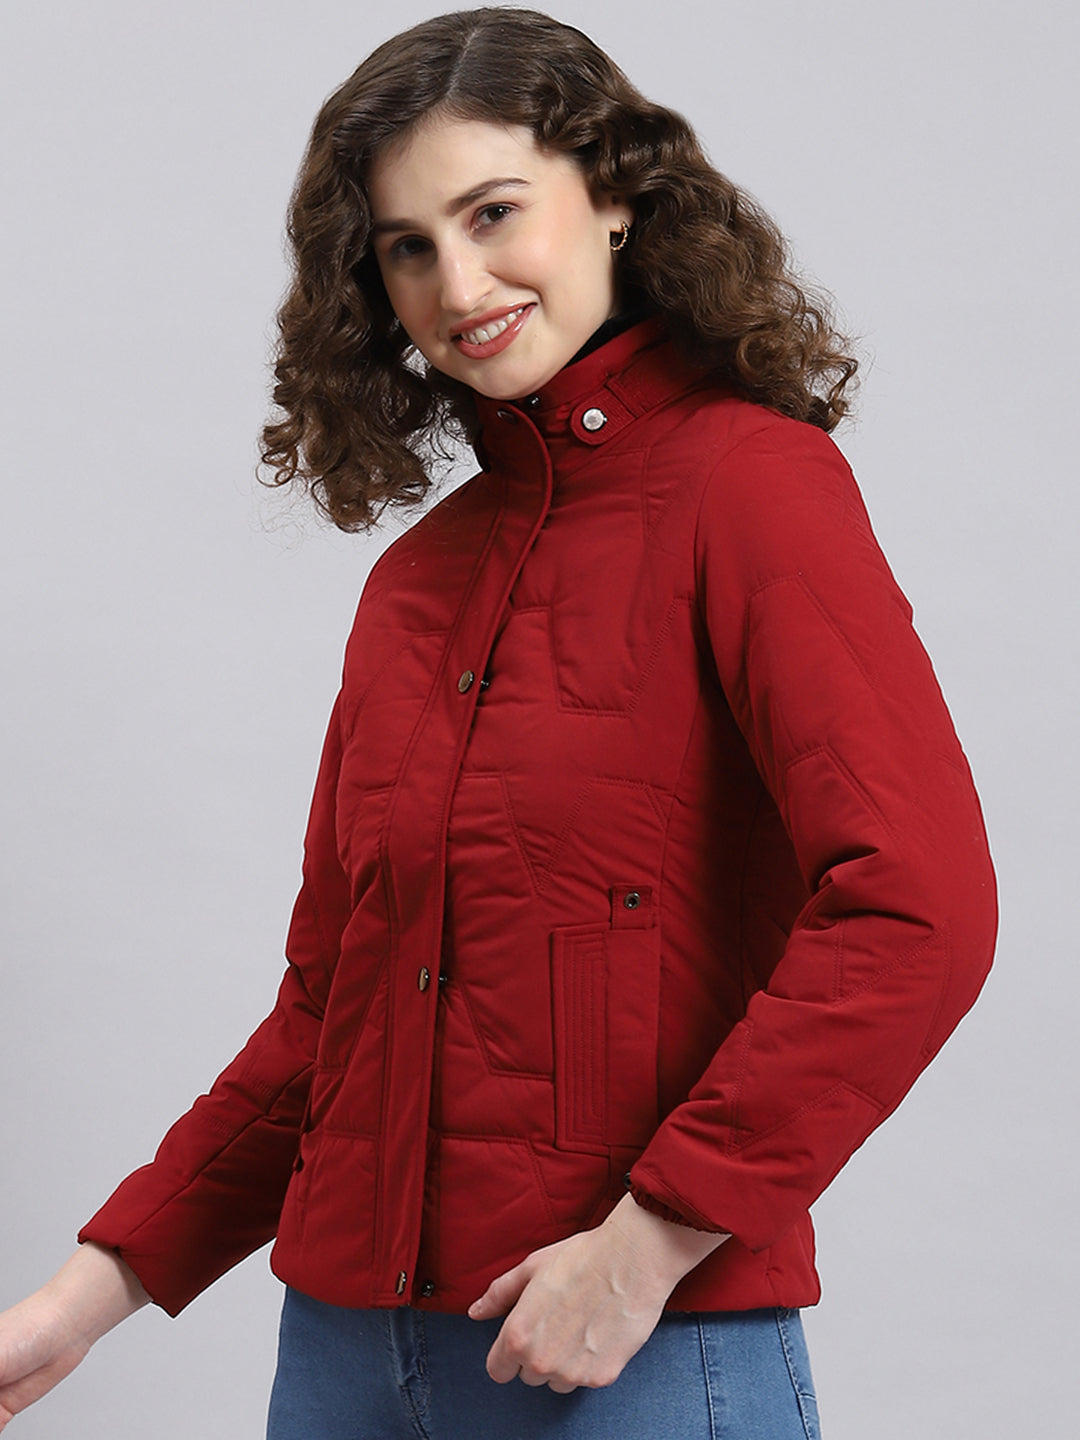 Full Sleeve Red Women's Jackets at Rs 1600/piece in Palwal